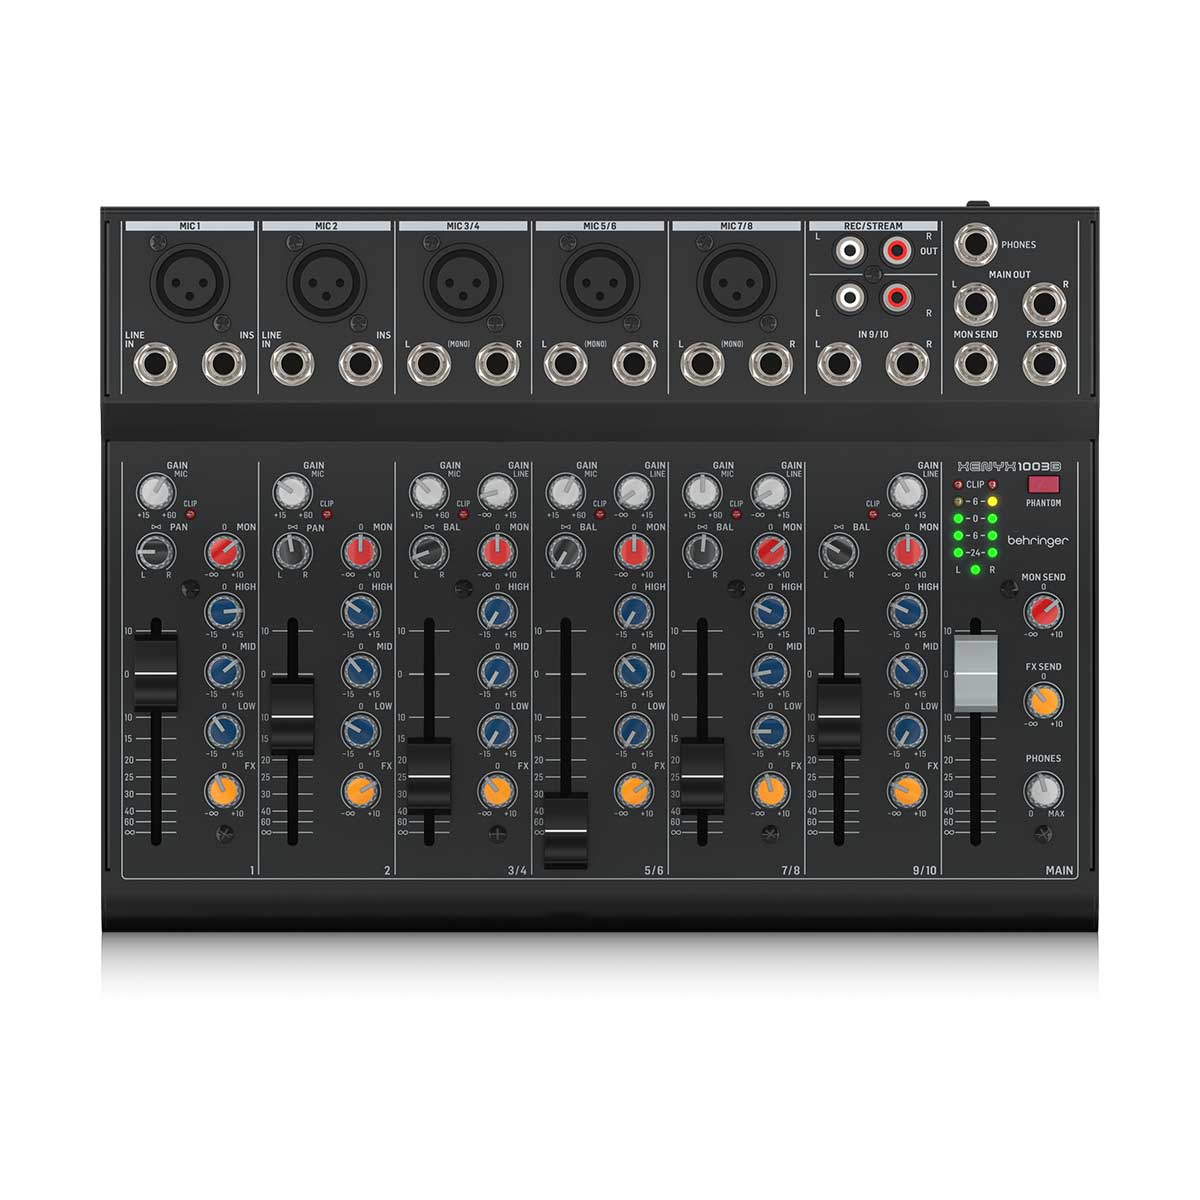 Behringer Xenyx 1003B 10 Channel Battery or Mains Operated Mixer